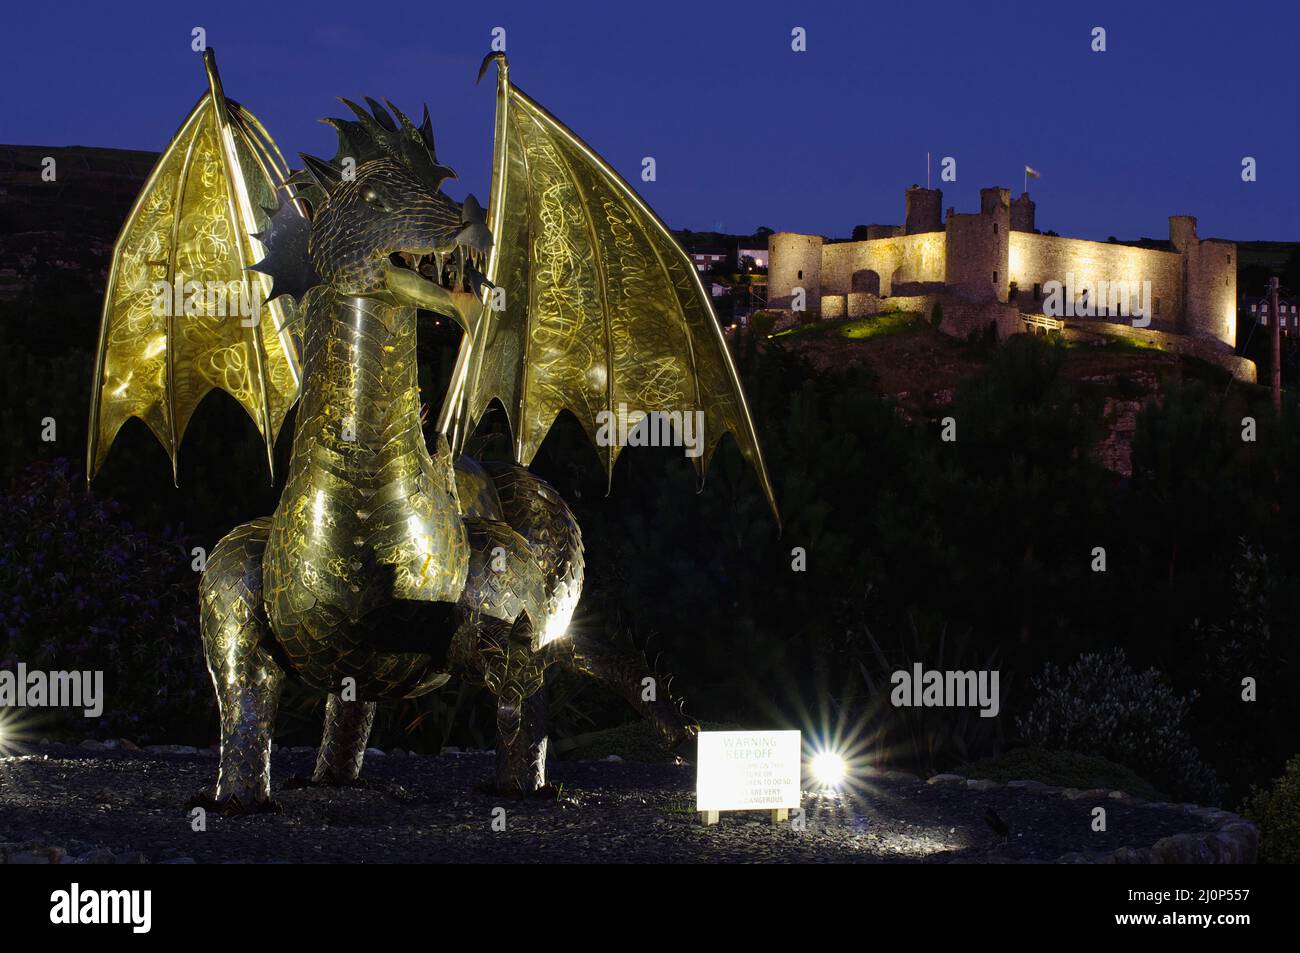 Dewi the Dragon, Sculpture, Harlech, North Wales Stock Photo